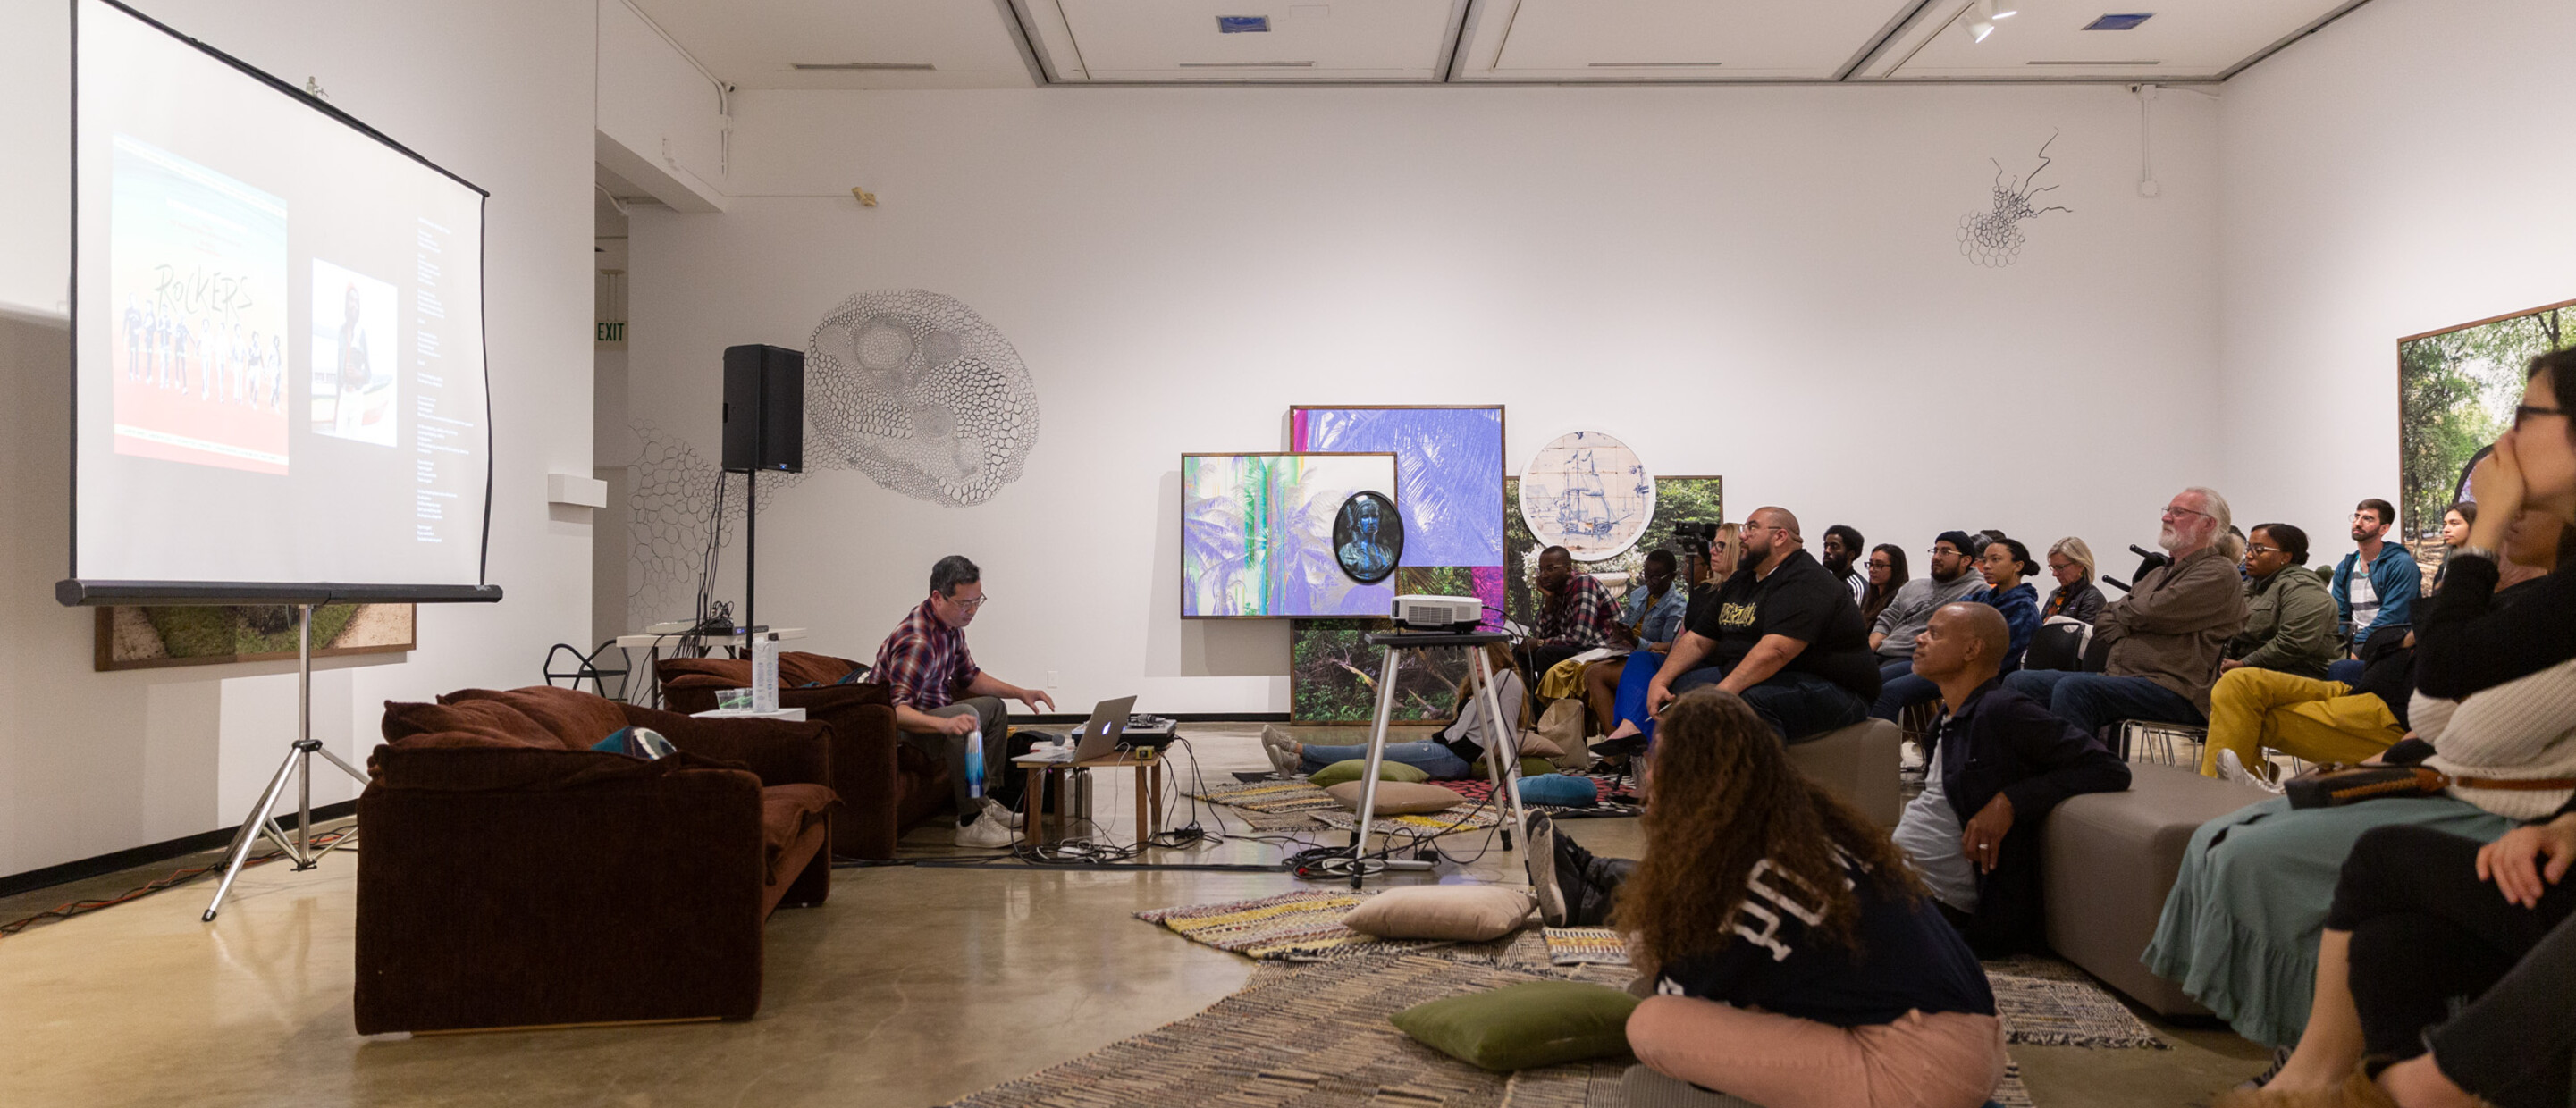 Wideview of an event in a gallery with speaker up front and group of people in the audience